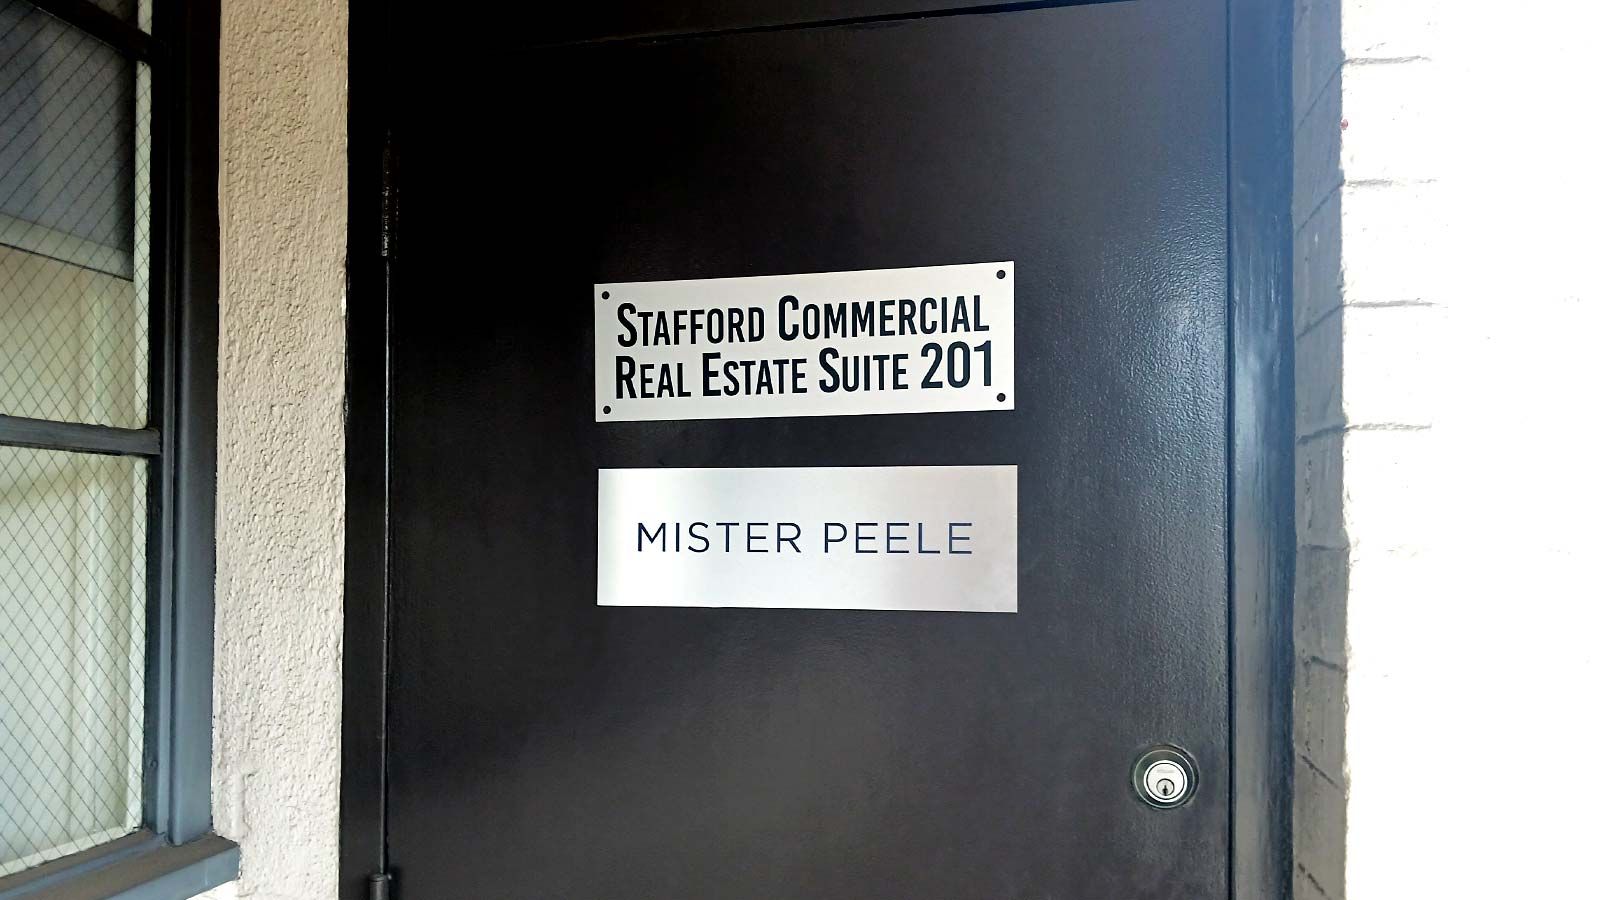 Stafford Commercial Real Estate outdoor wall sign